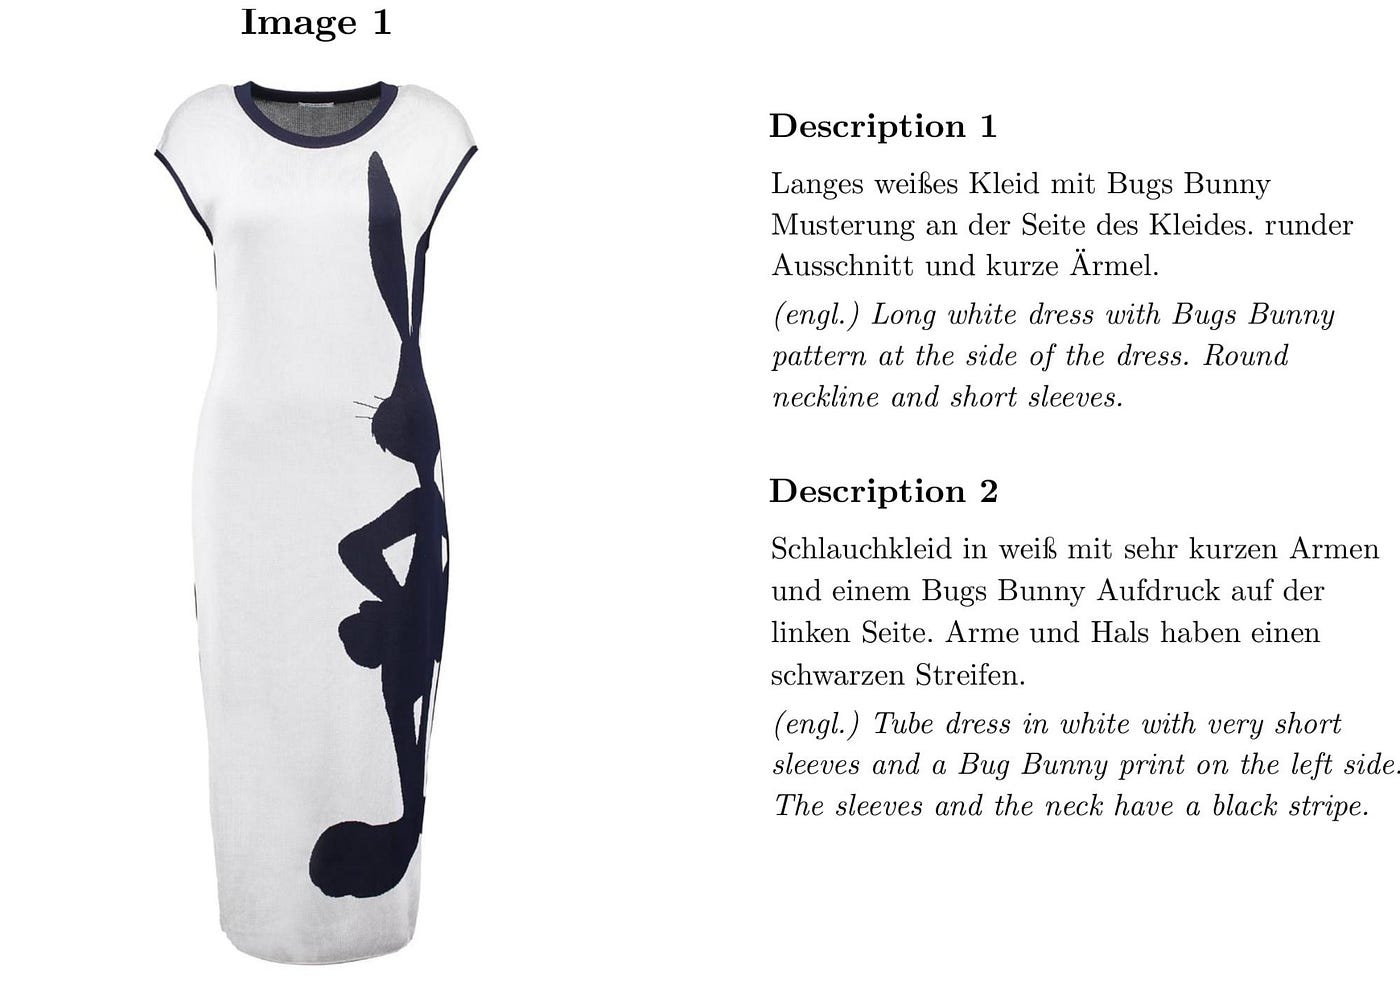 Zalando Dress Recommendation and Tagging | by Marco Cerliani | Towards Data  Science